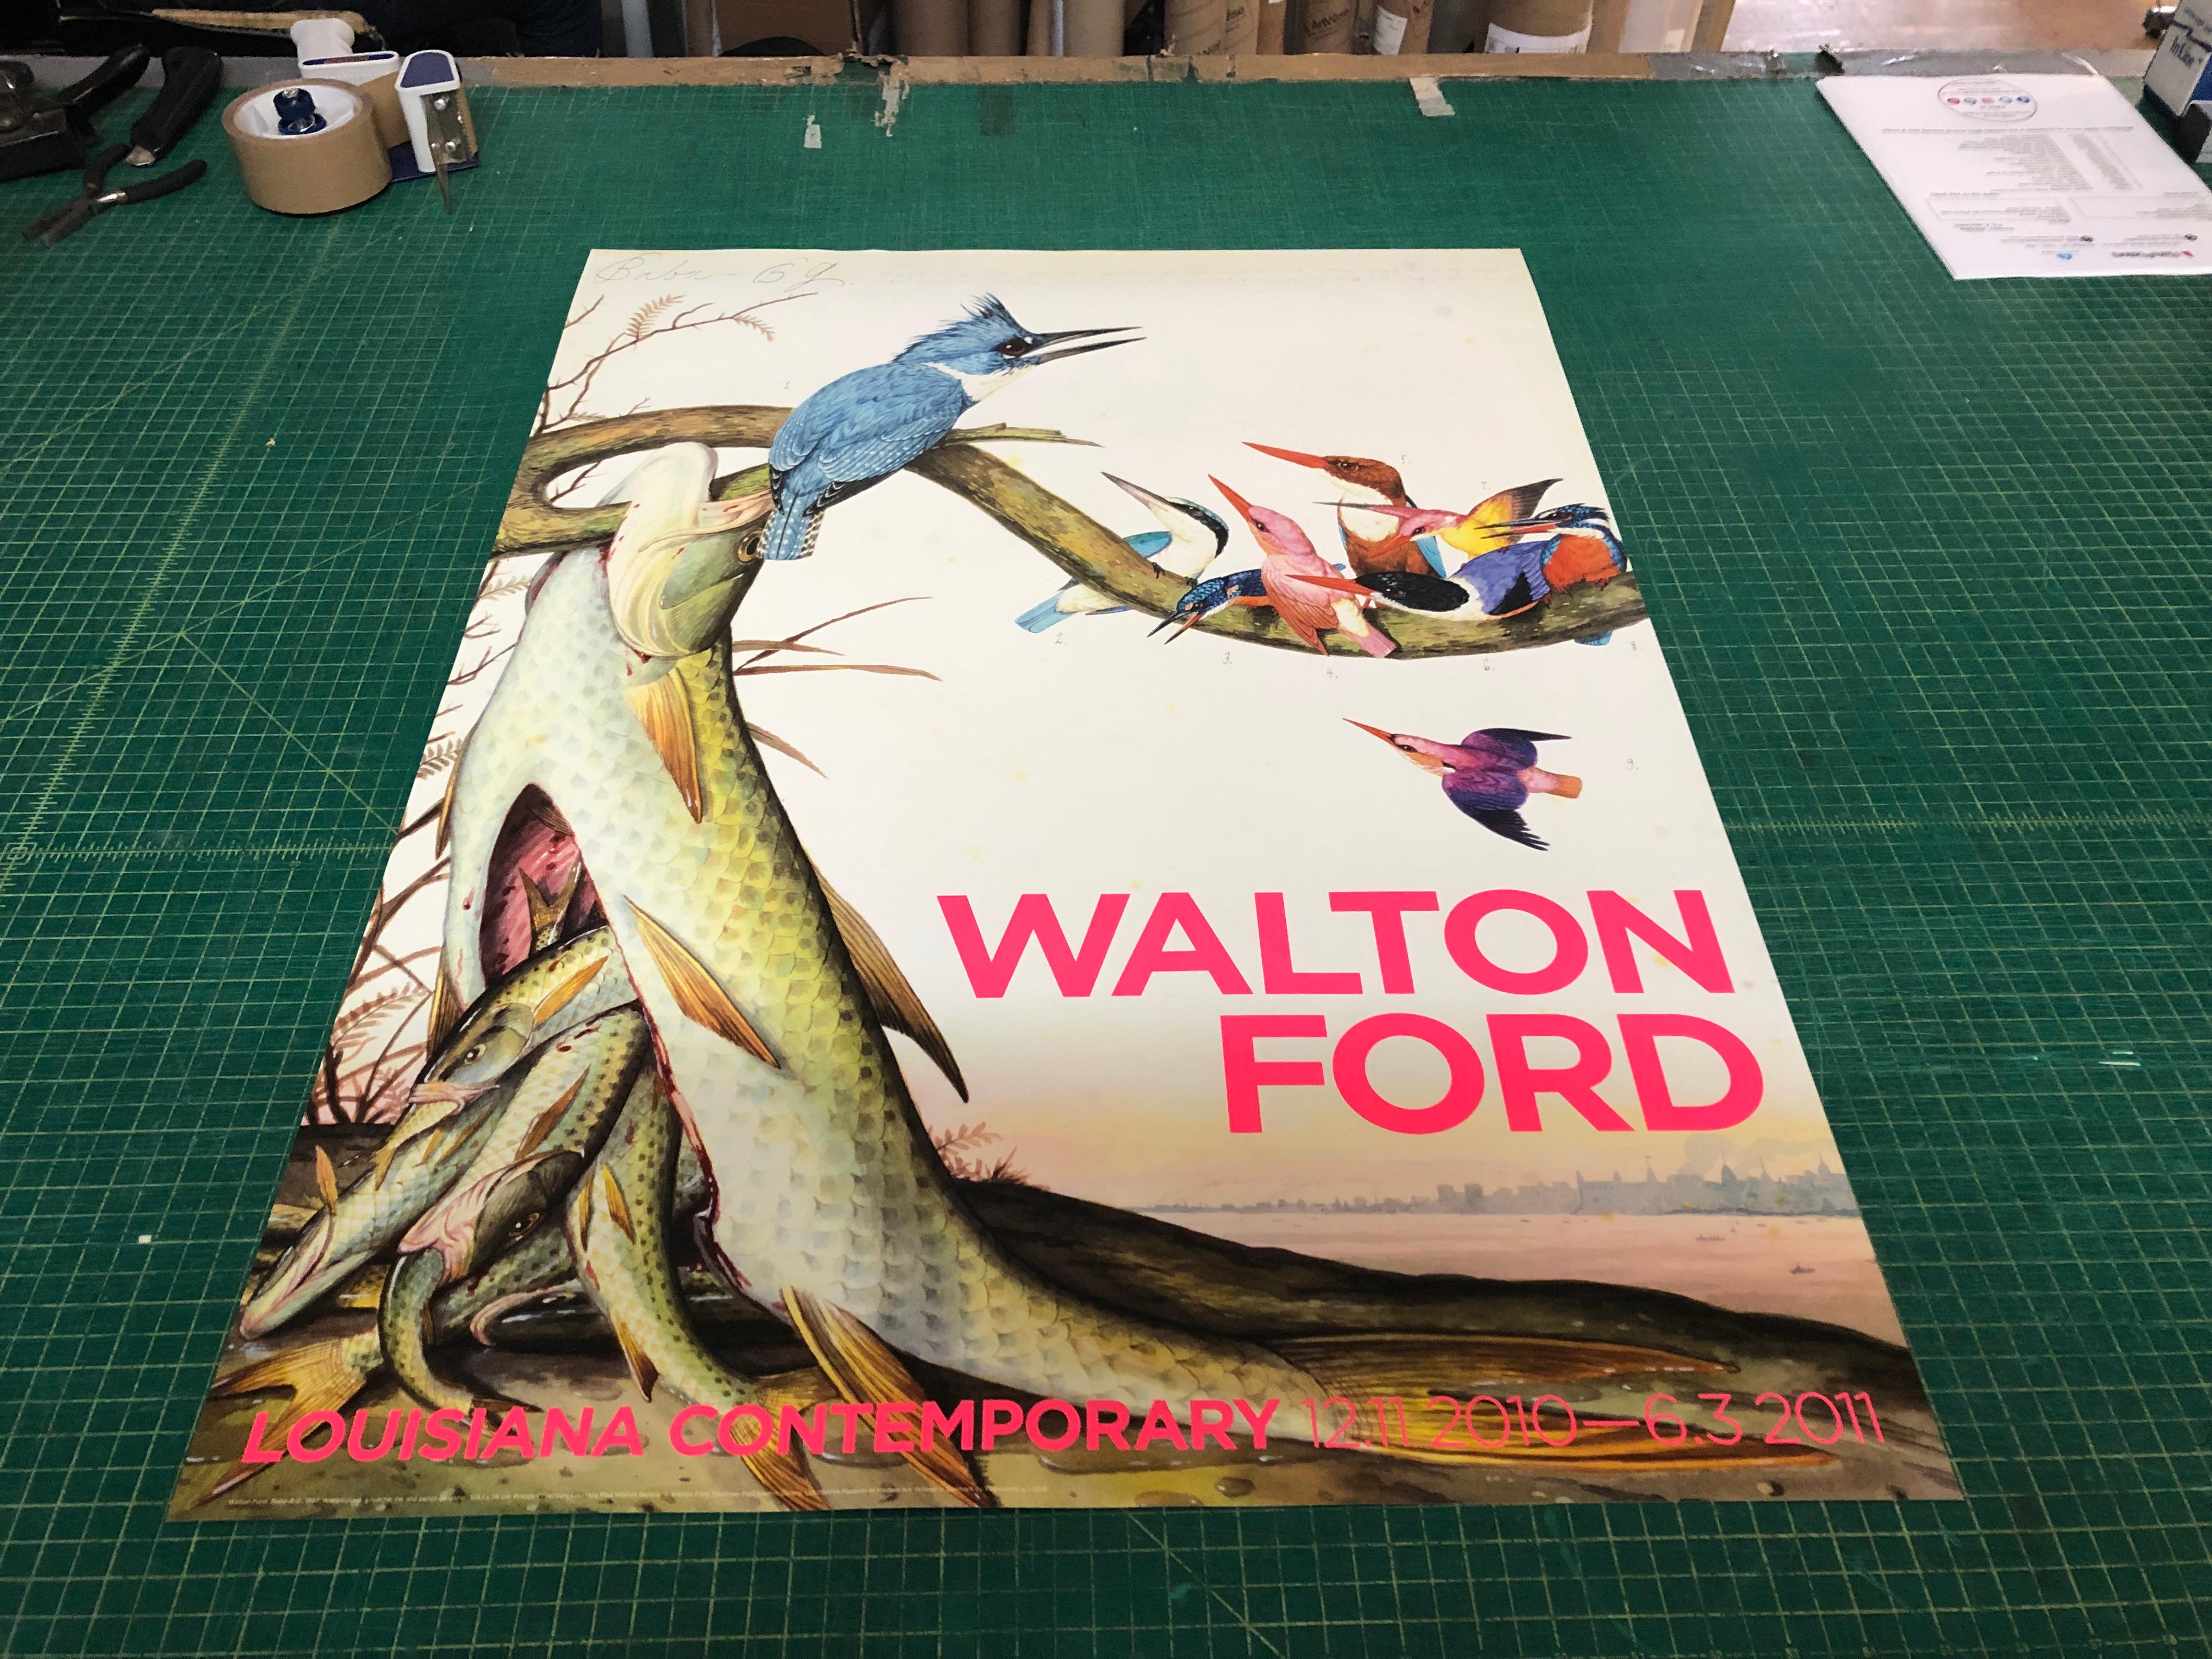 2010 Walton Ford 'Baba' museum exhibition poster 1